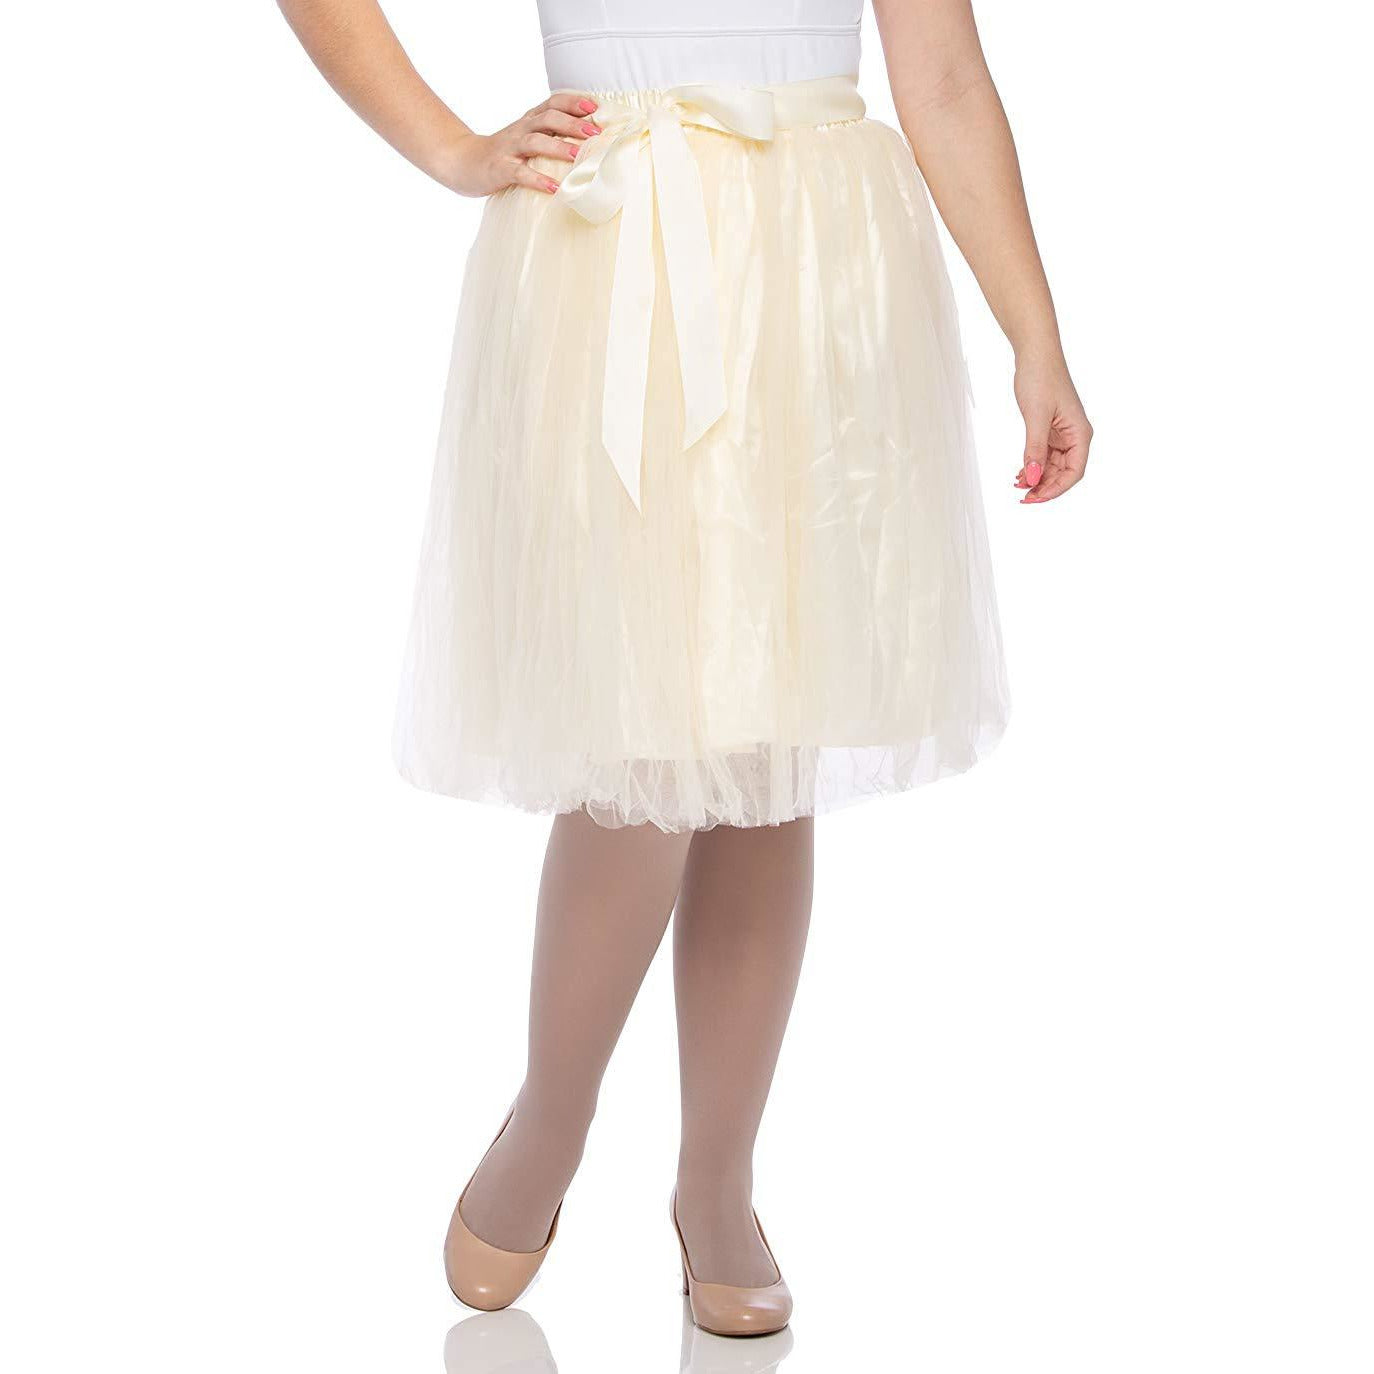 Adults & Girls A-line Knee Length Tutu Tulle Skirt - Regular and Plus Size in Ivory